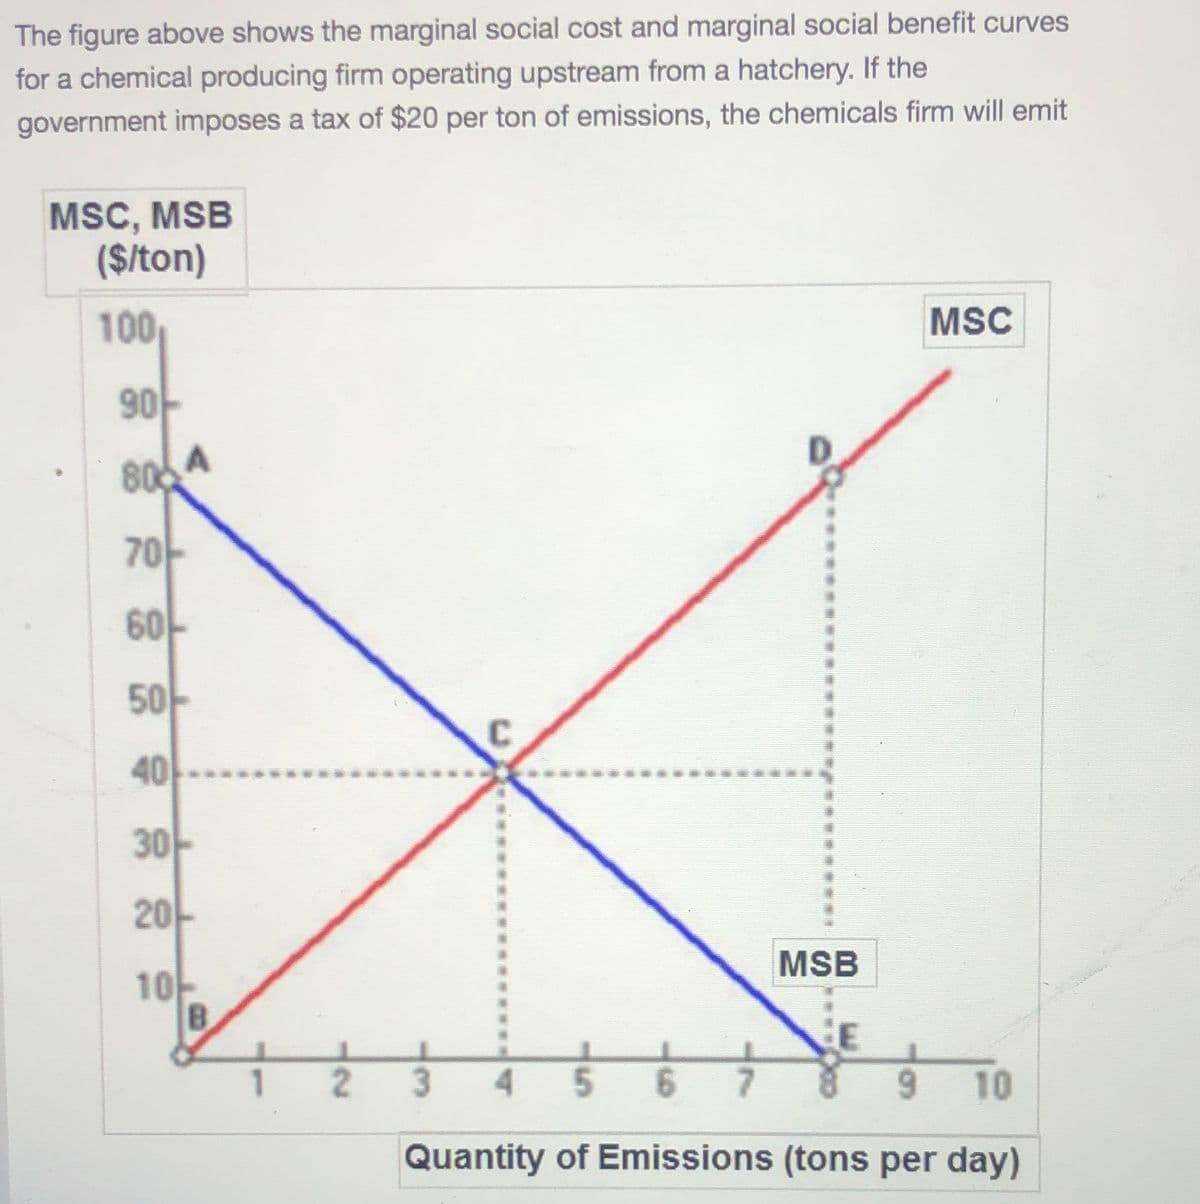 The figure above shows the marginal social cost and marginal social benefit curves
for a chemical producing firm operating upstream from a hatchery. If the
government imposes a tax of $20 per ton of emissions, the chemicals firm will emit
MSC, MSB
($/ton)
100
MSC
90
800
70
60
50
40
30
20
MSB
10
2.
3.
6.
10
Quantity of Emissions (tons per day)
